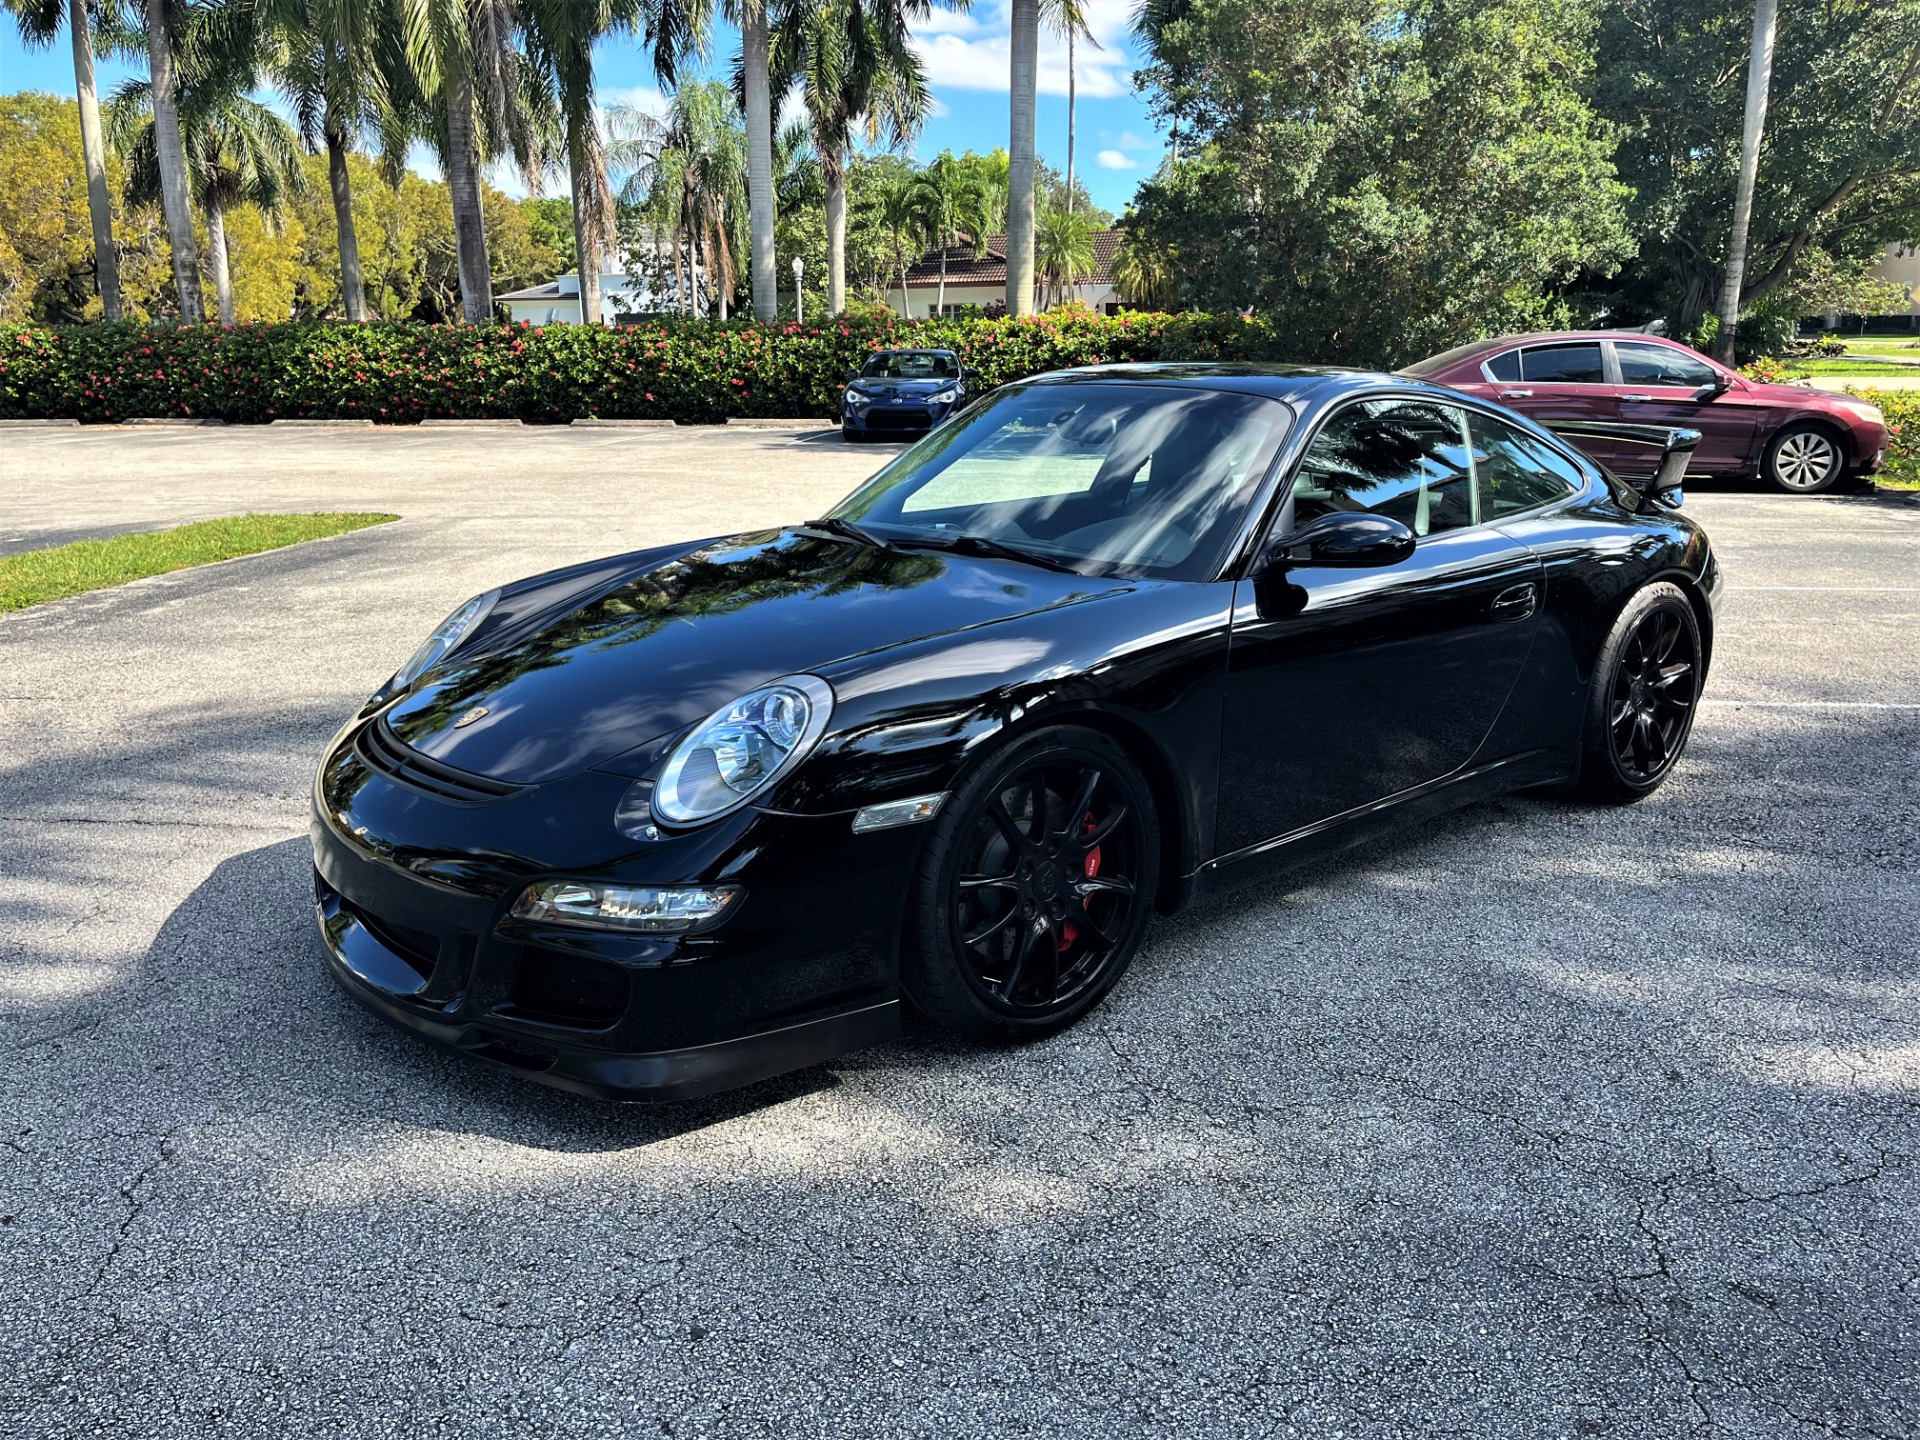 Used 2007 Porsche 911 GT3 for sale Sold at The Gables Sports Cars in Miami FL 33146 1